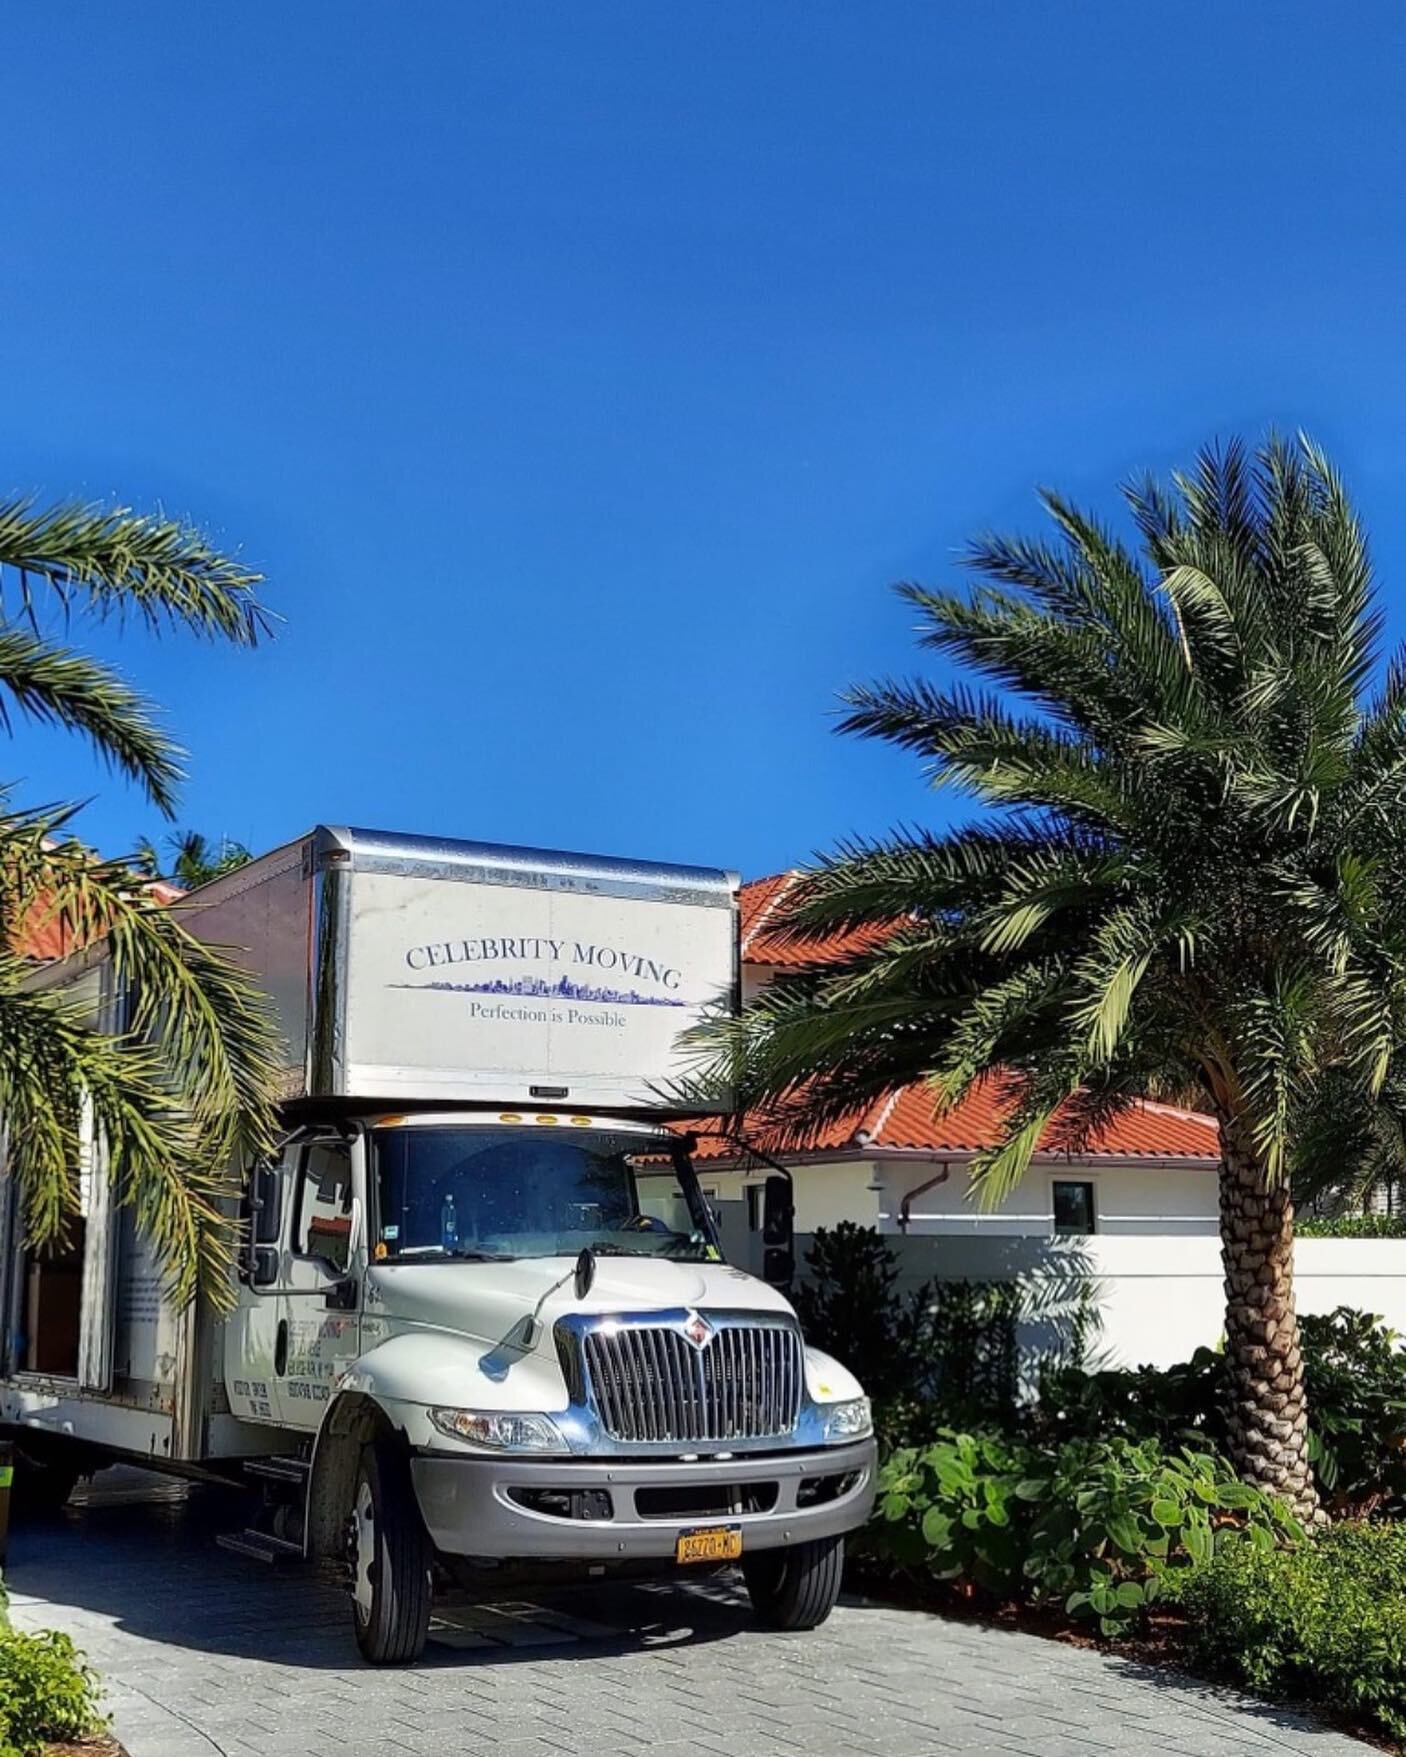 Next stop📍FL! Your personal satisfaction is our primary purpose. We are fully equipped and eager to handle any of your moving and storage needs. 🚚📦☀️

#celebritymoving #movingnyc #longdistancemovers #nycmovers